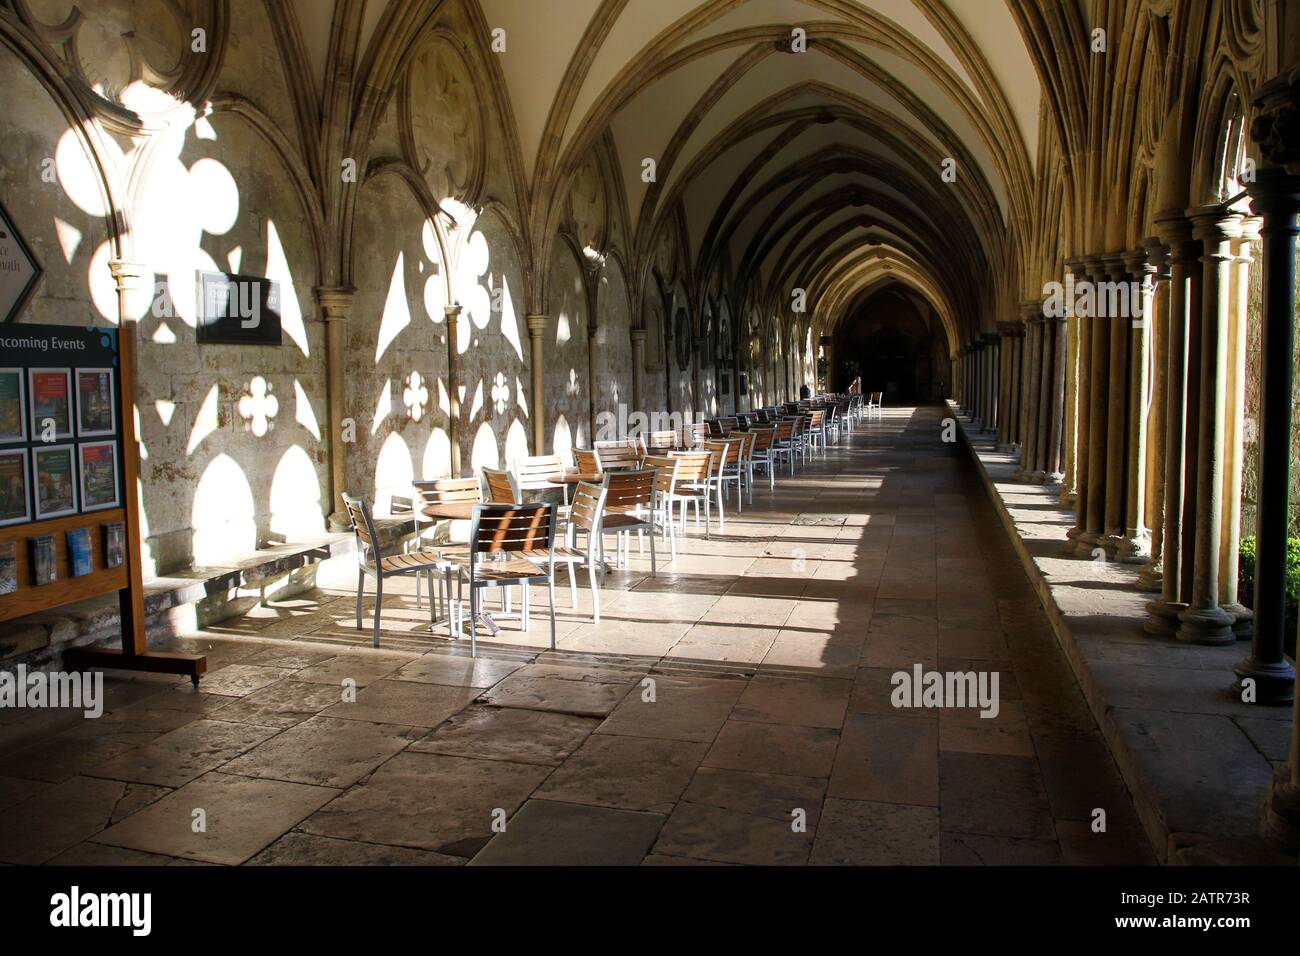 Cloisters at Salisbury Cathedral, Wiltshire, England Stock Photo